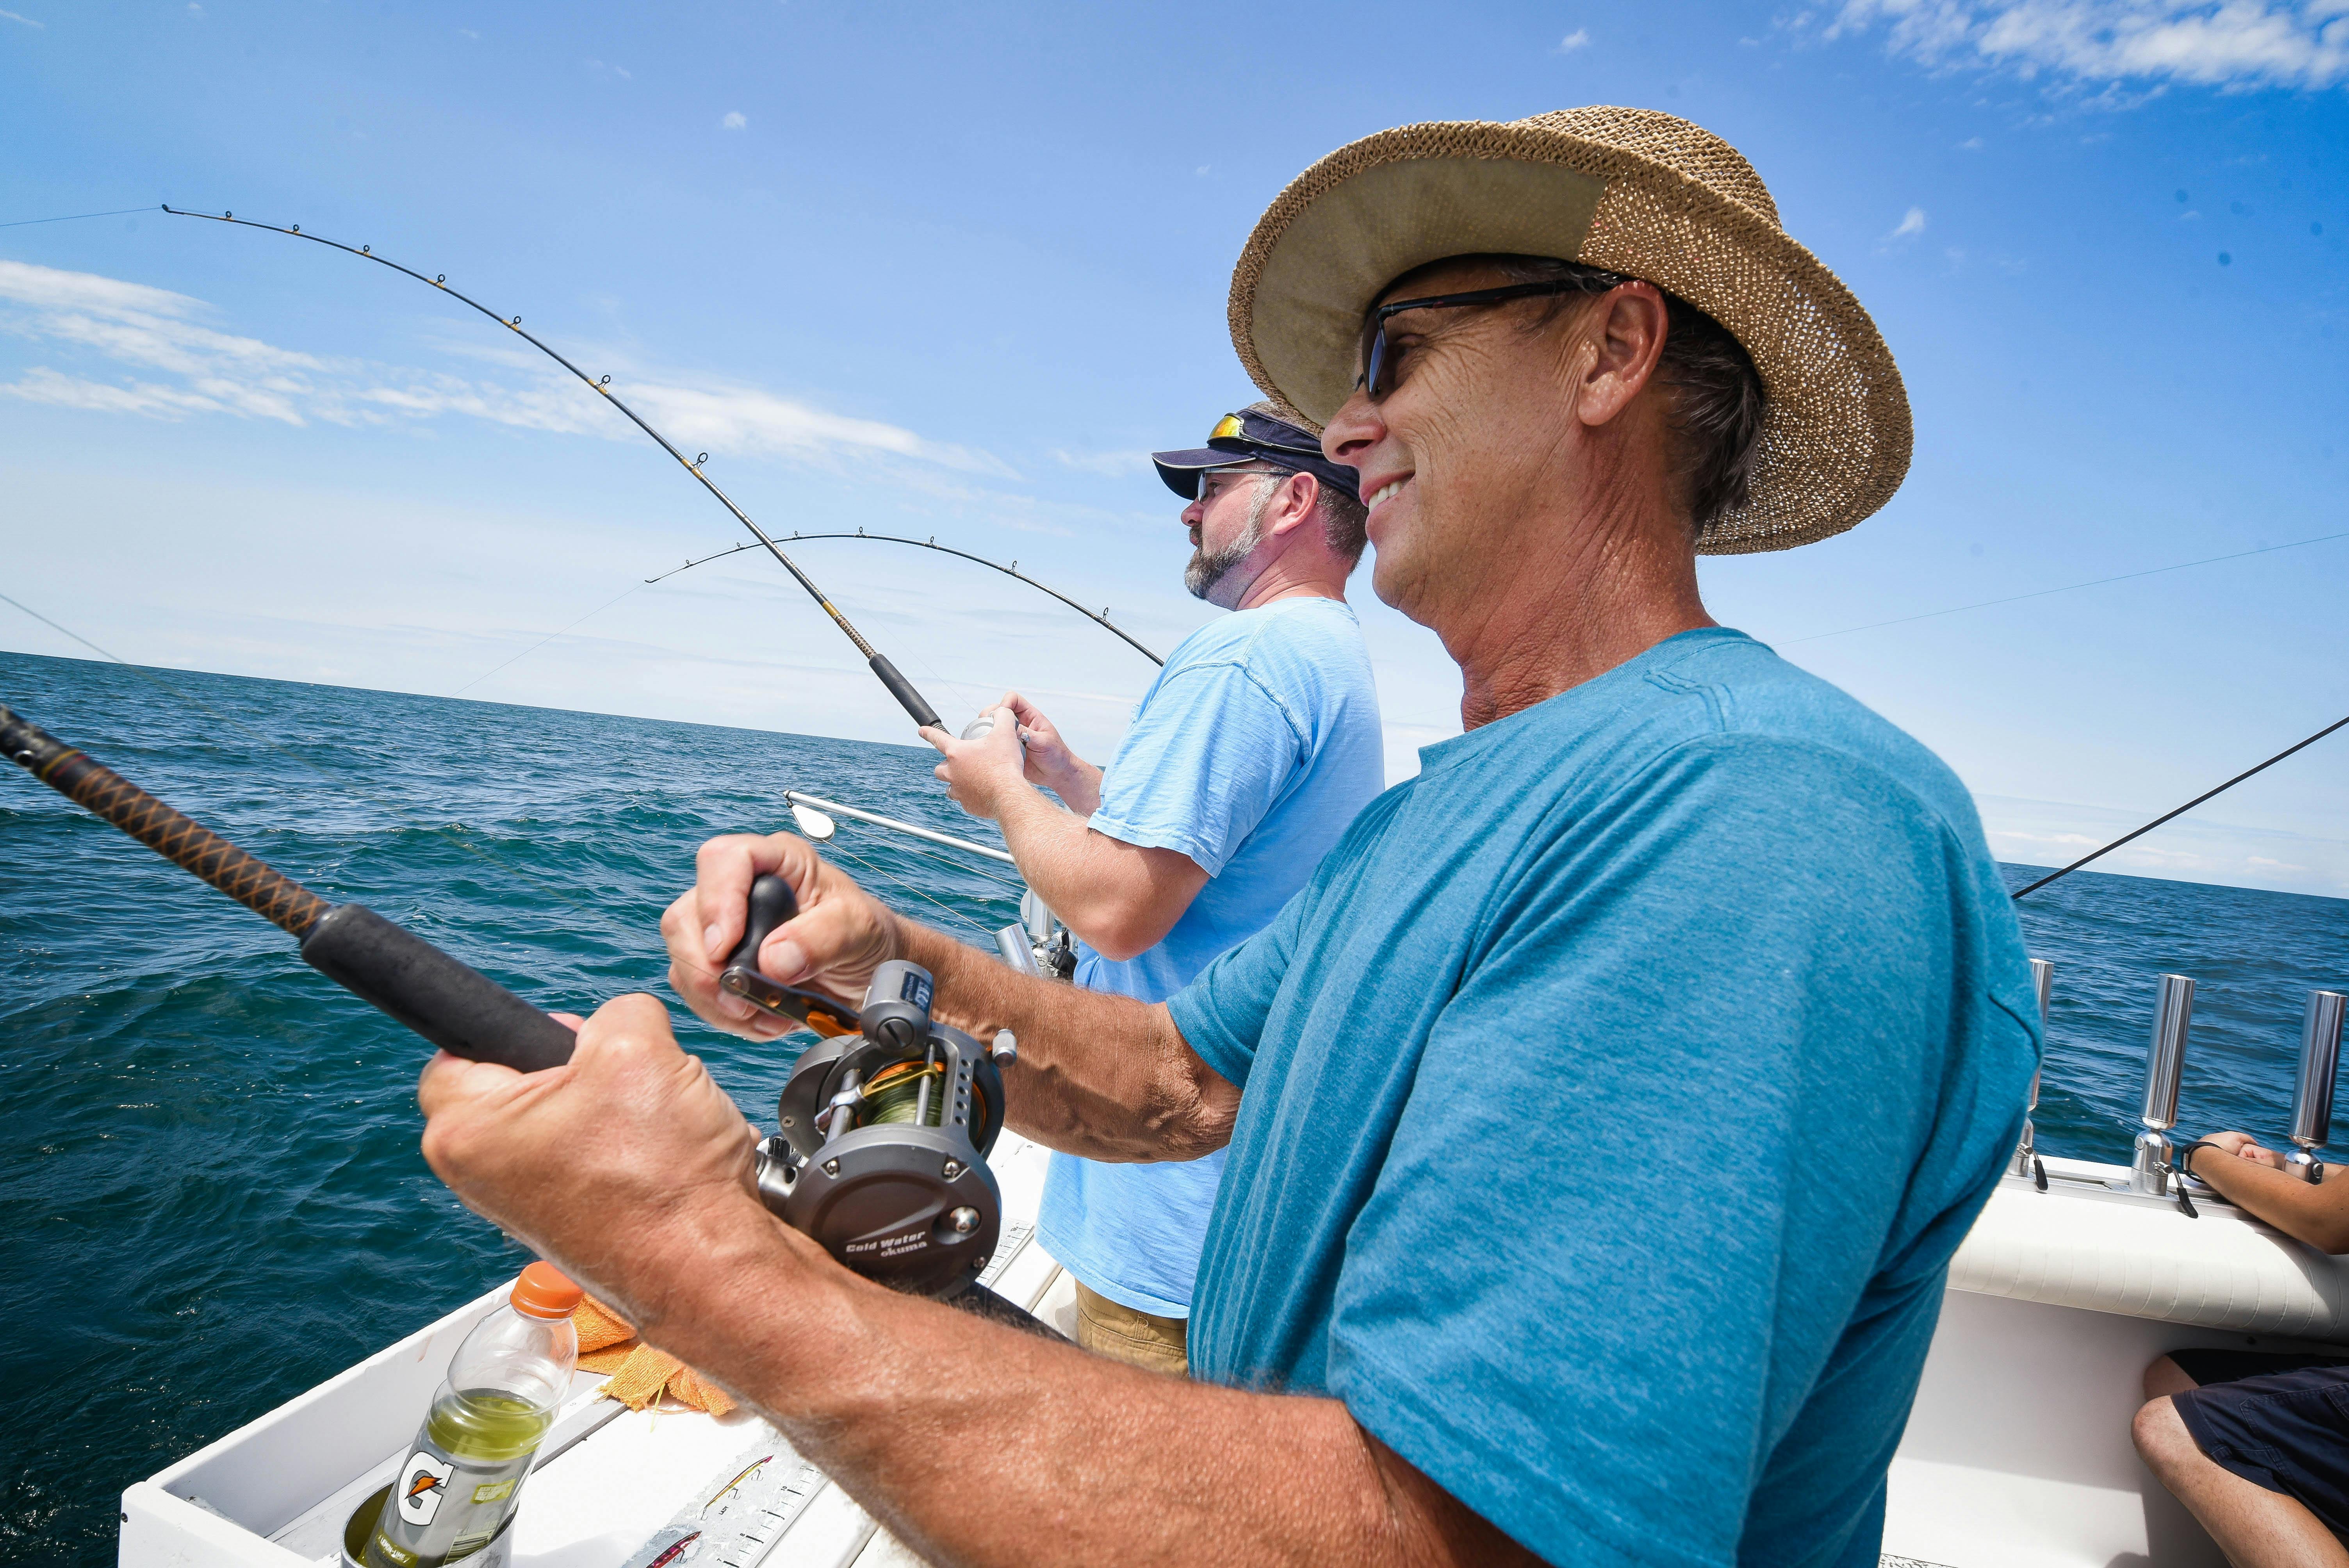 A Guide for Anglers: Where to Fish in Ashtabula County & Charter